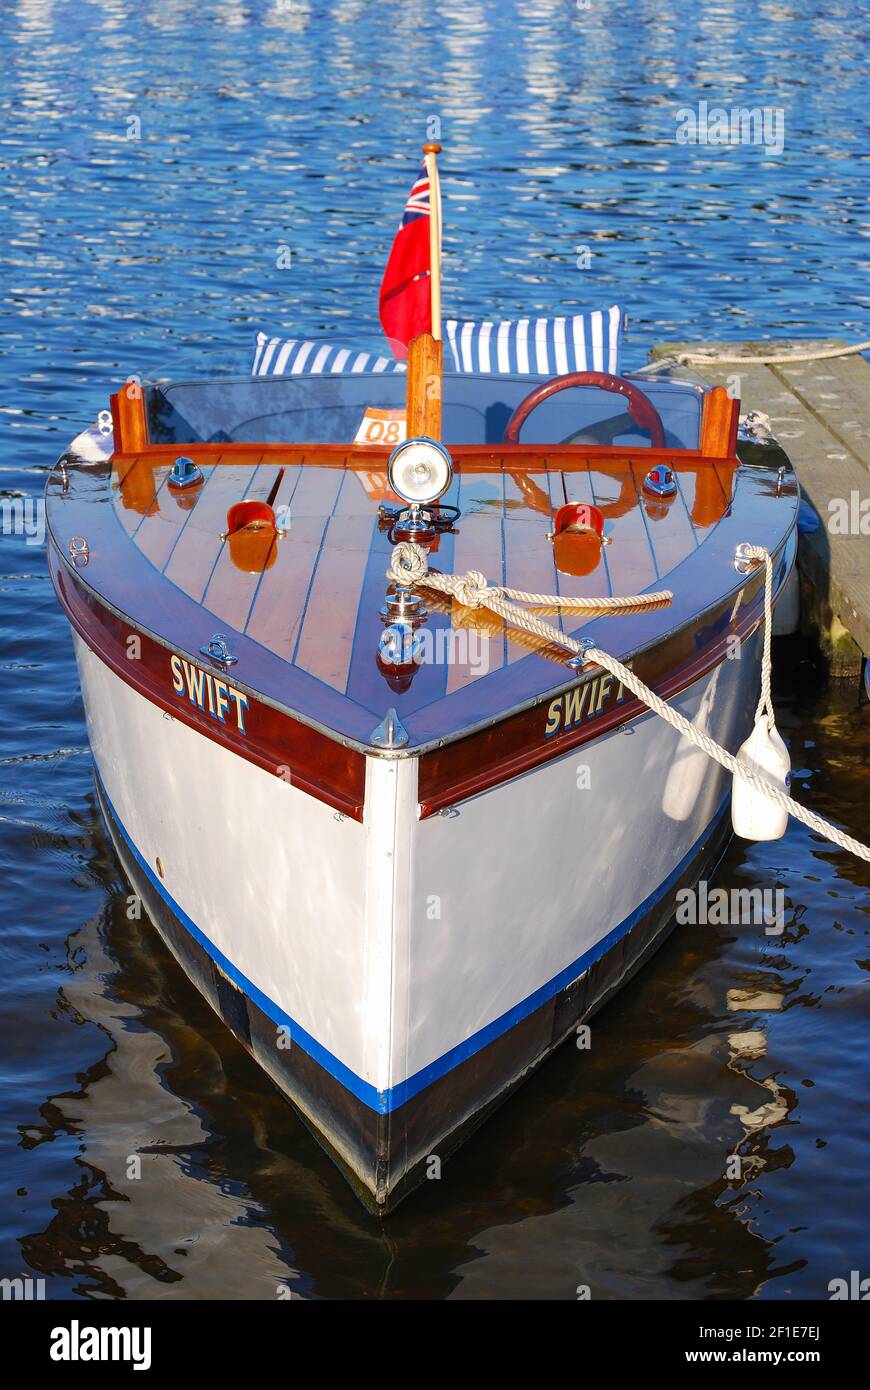 Wooden slipper launch at berth on River Thames, Henley-on-Thames, Oxfordshire, England, United Kingdom Stock Photo